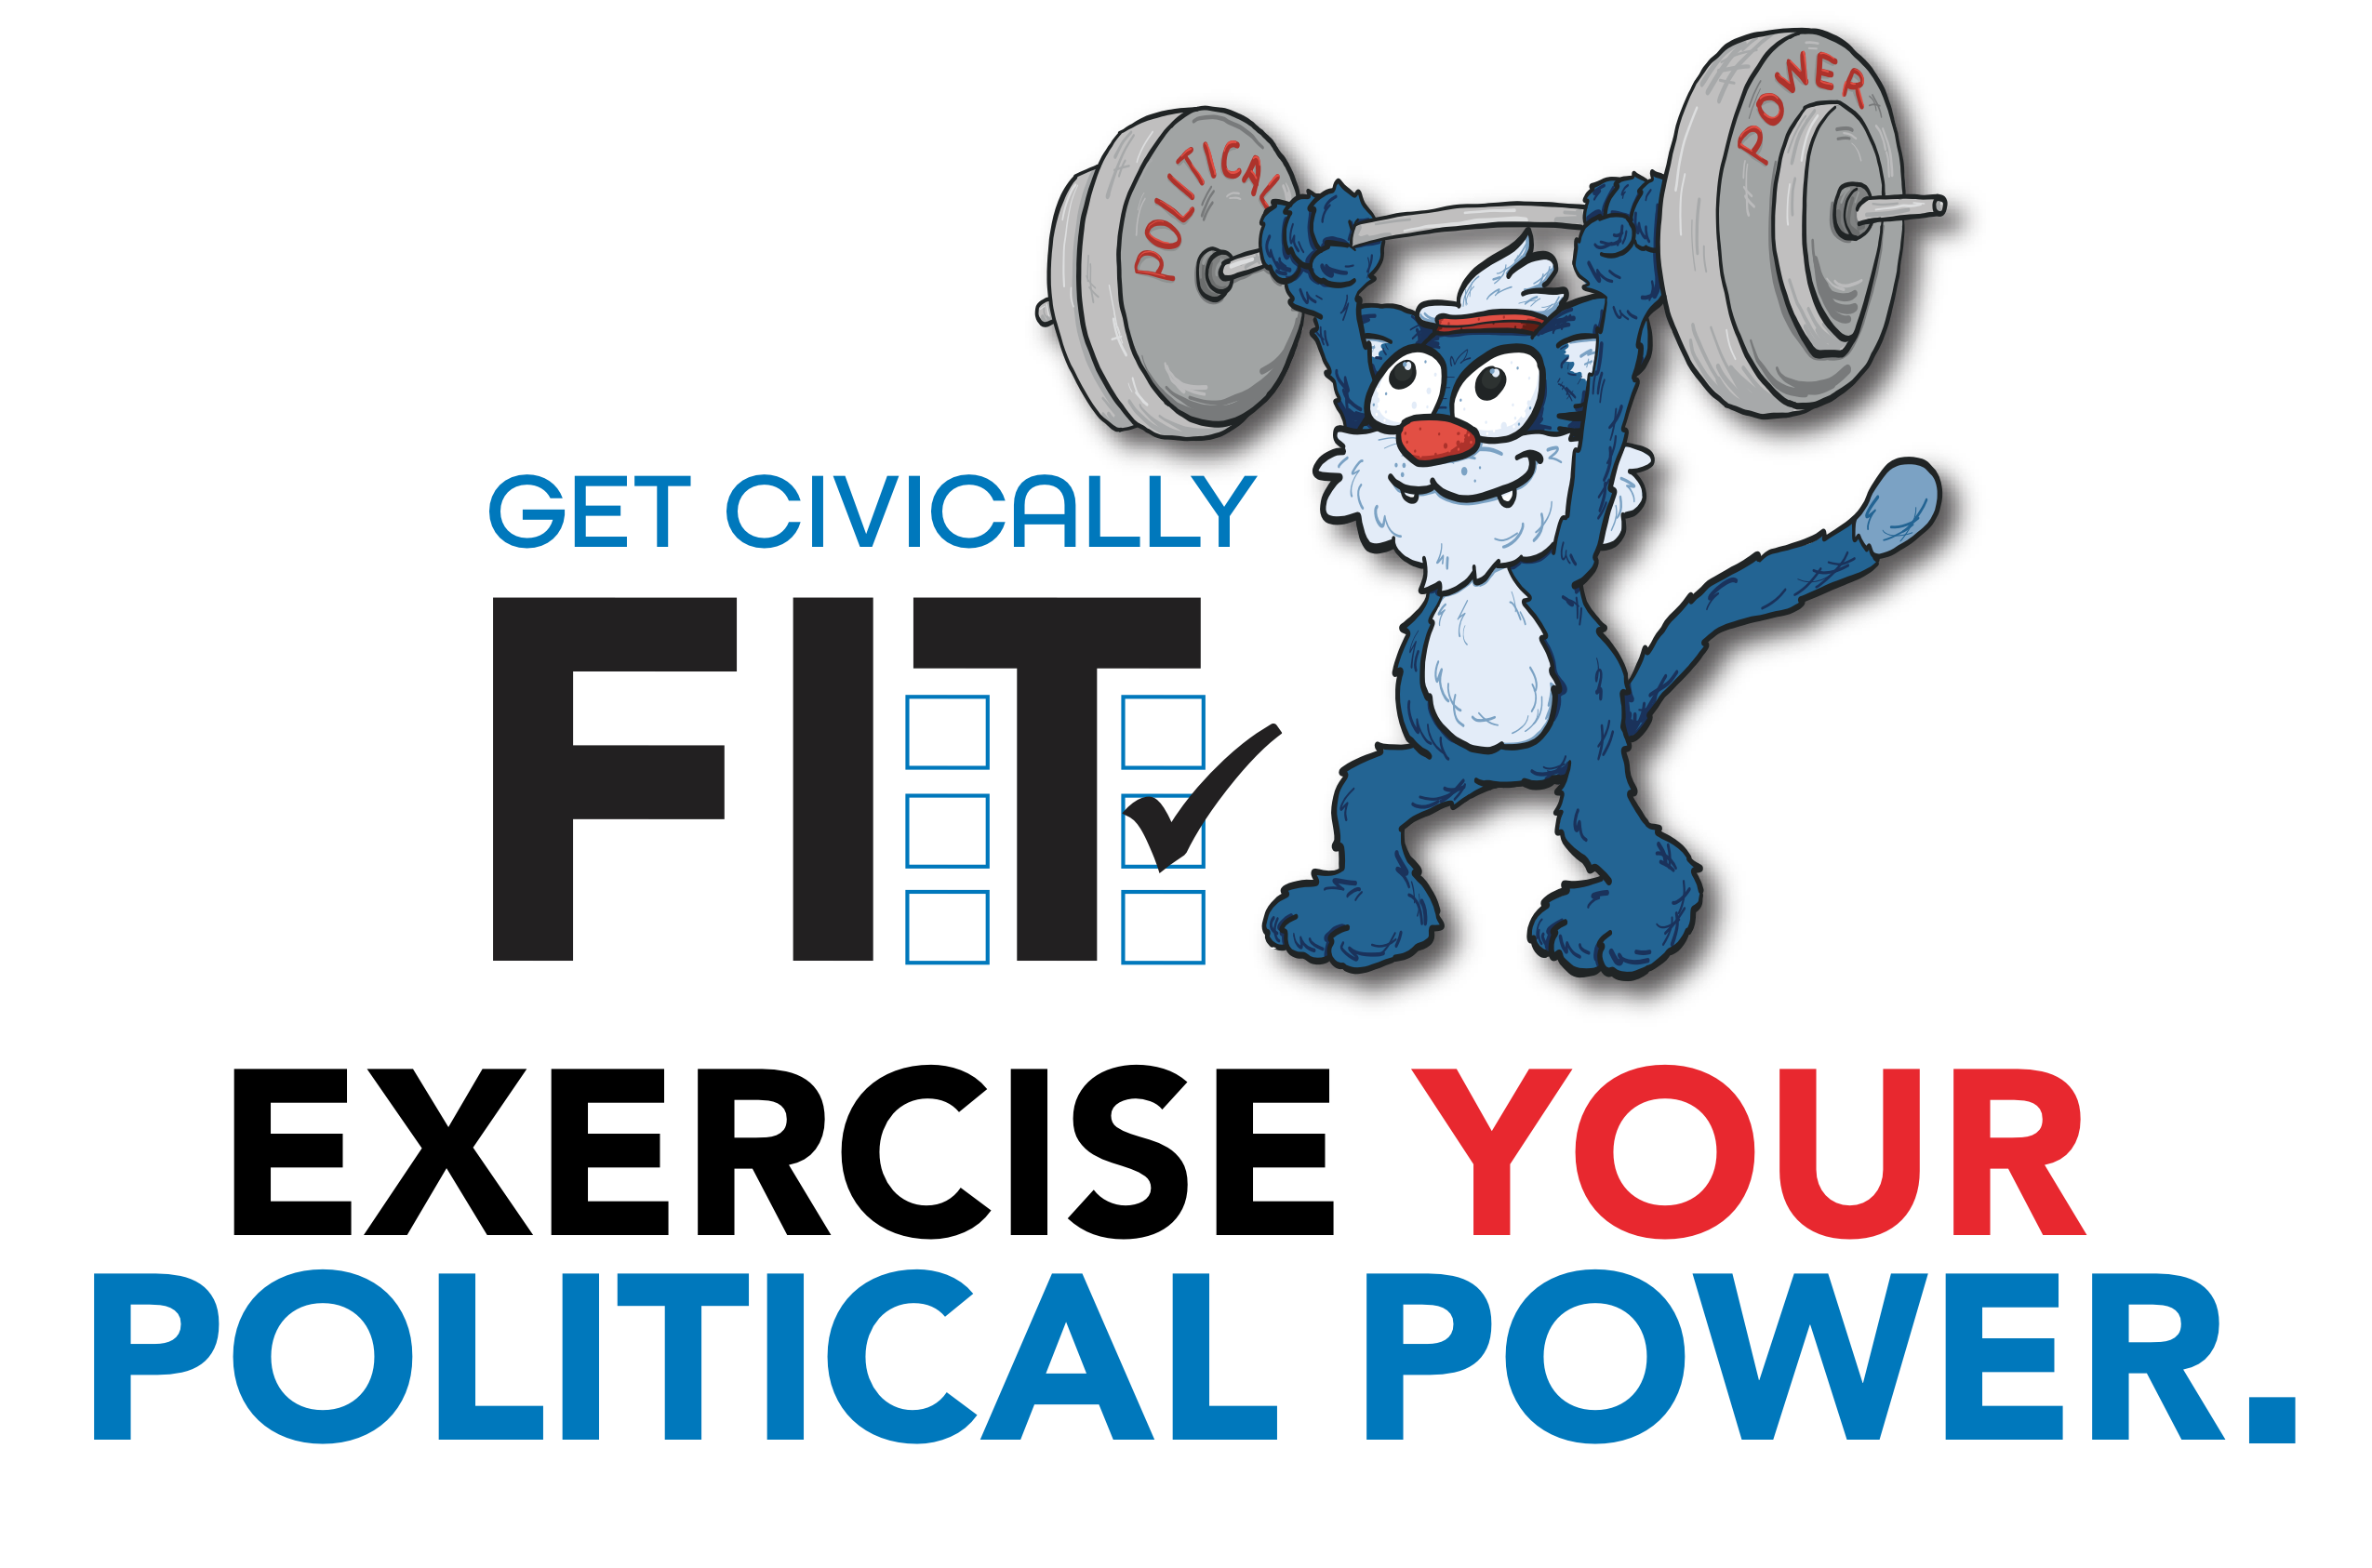 Willie the Wildcat lifting weights that say political power